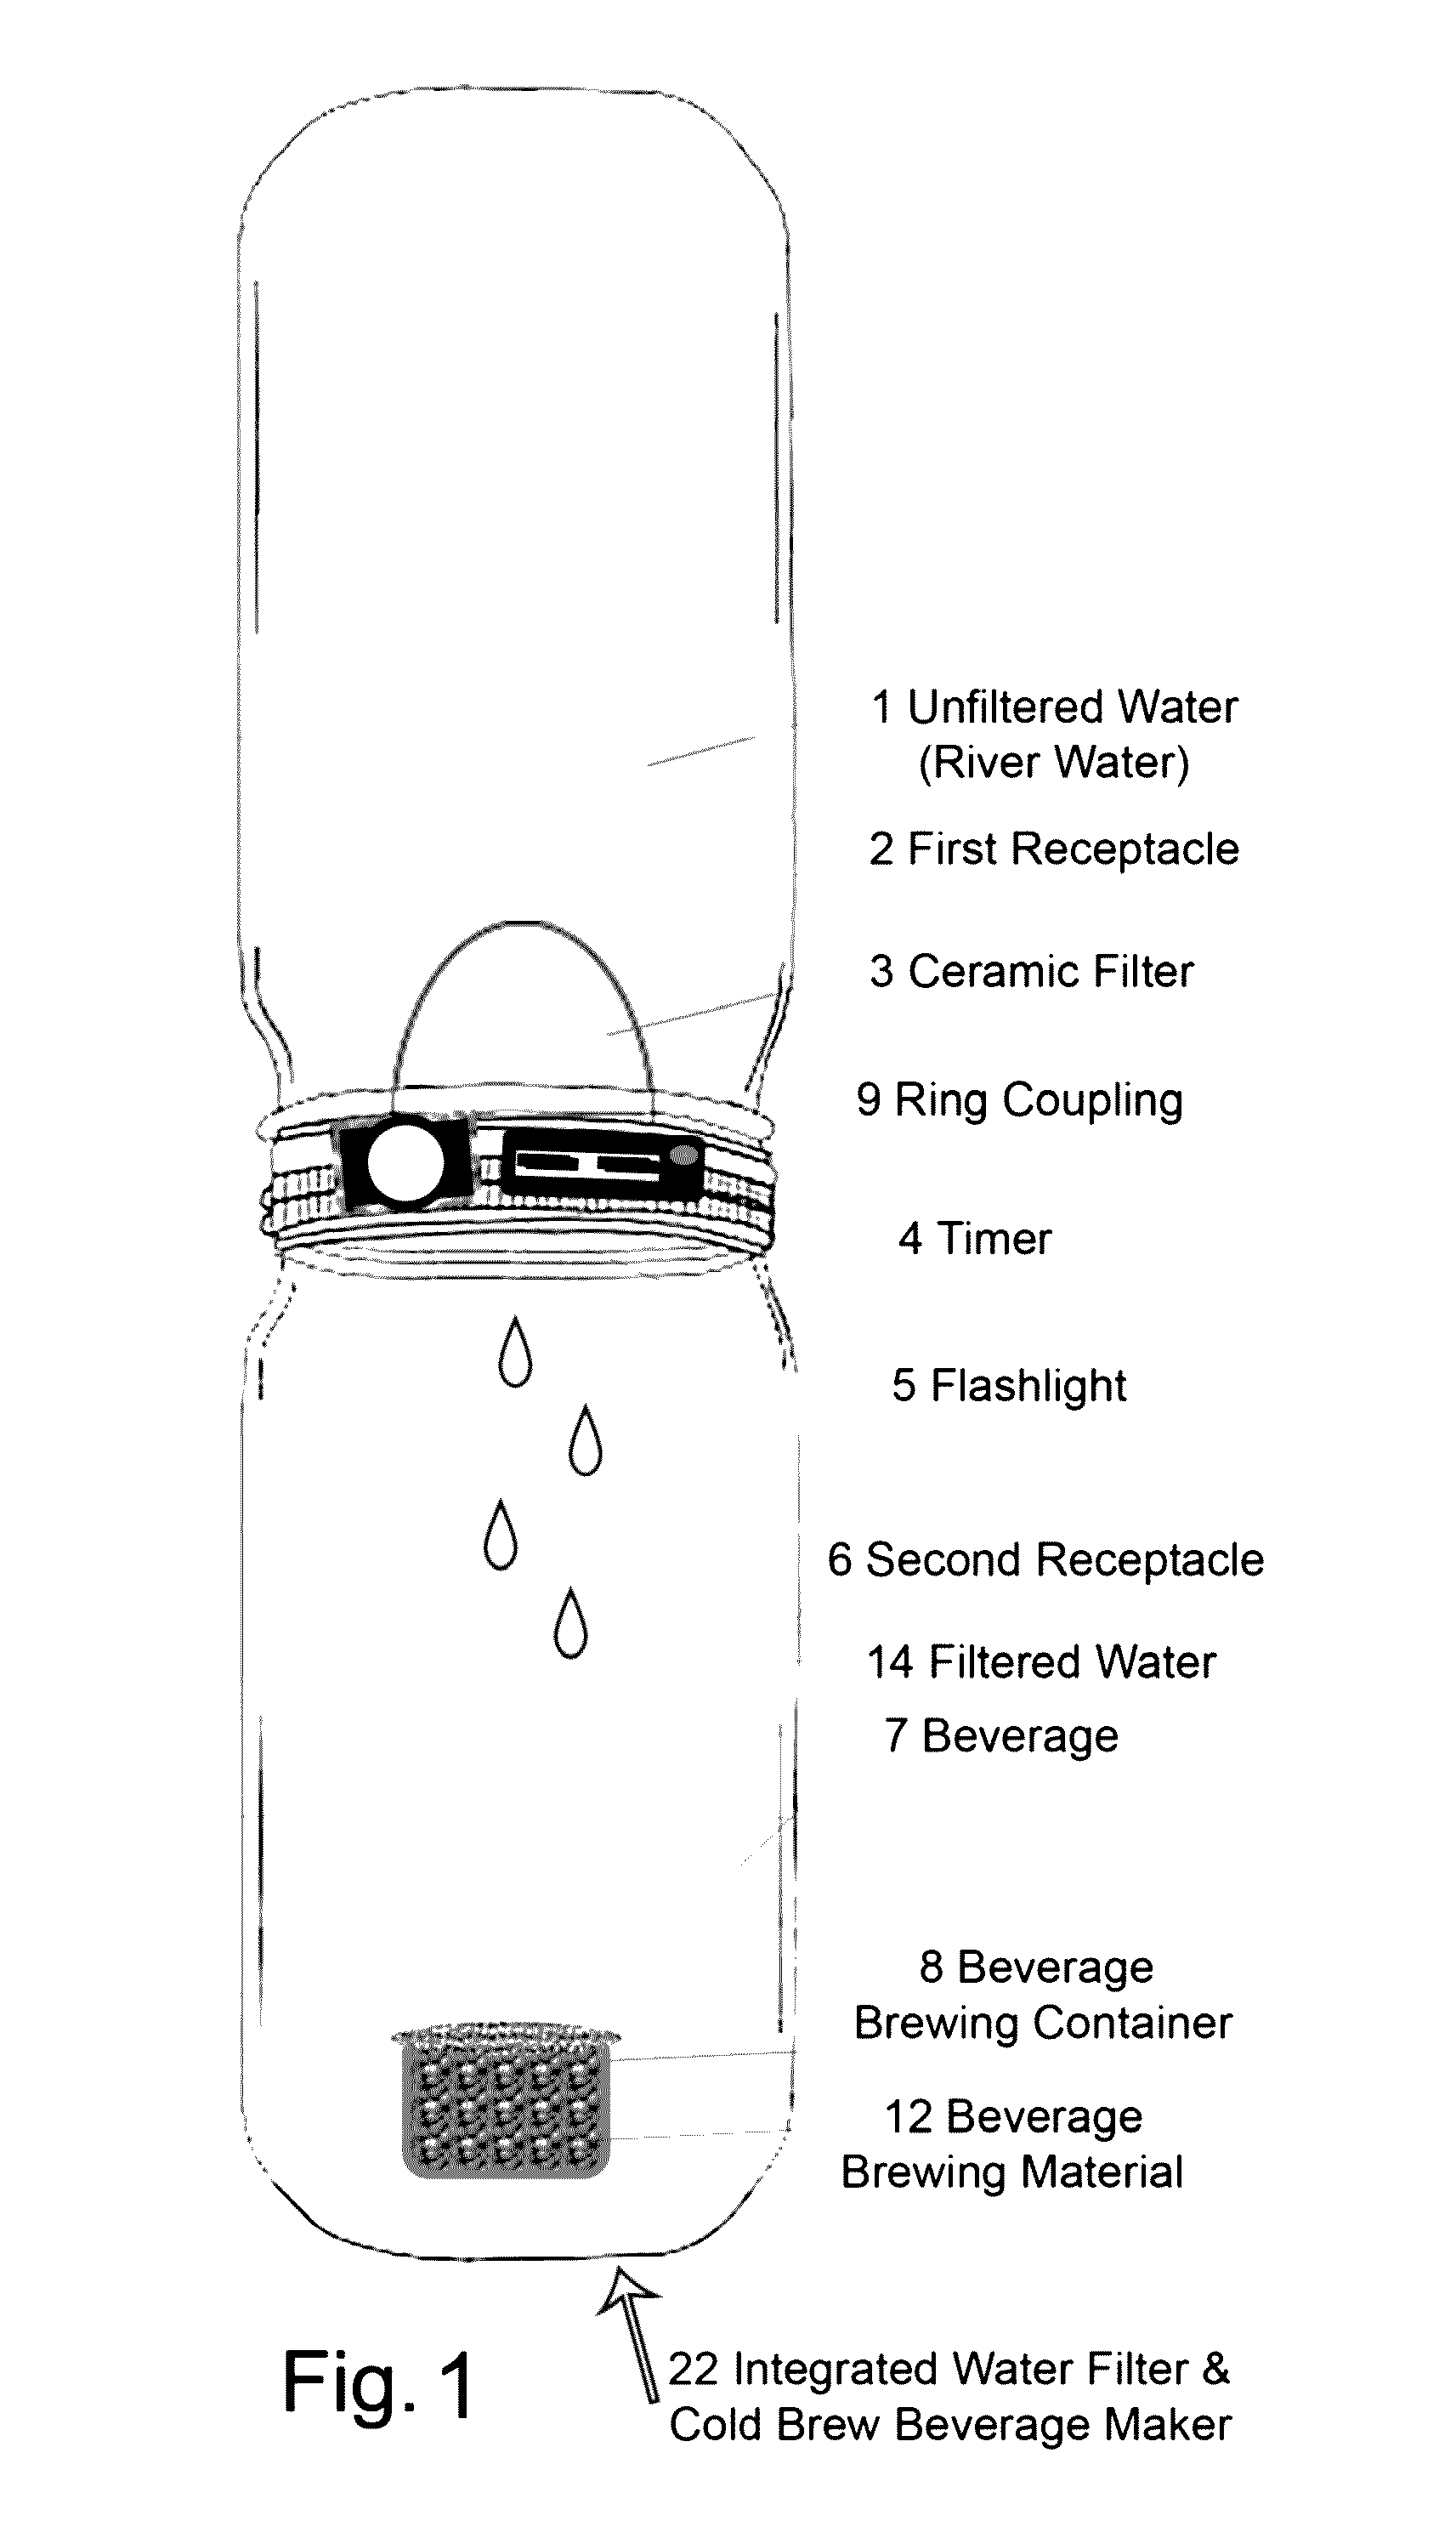 Apparatus and Method for making cold brewed beverage from unfiltered water